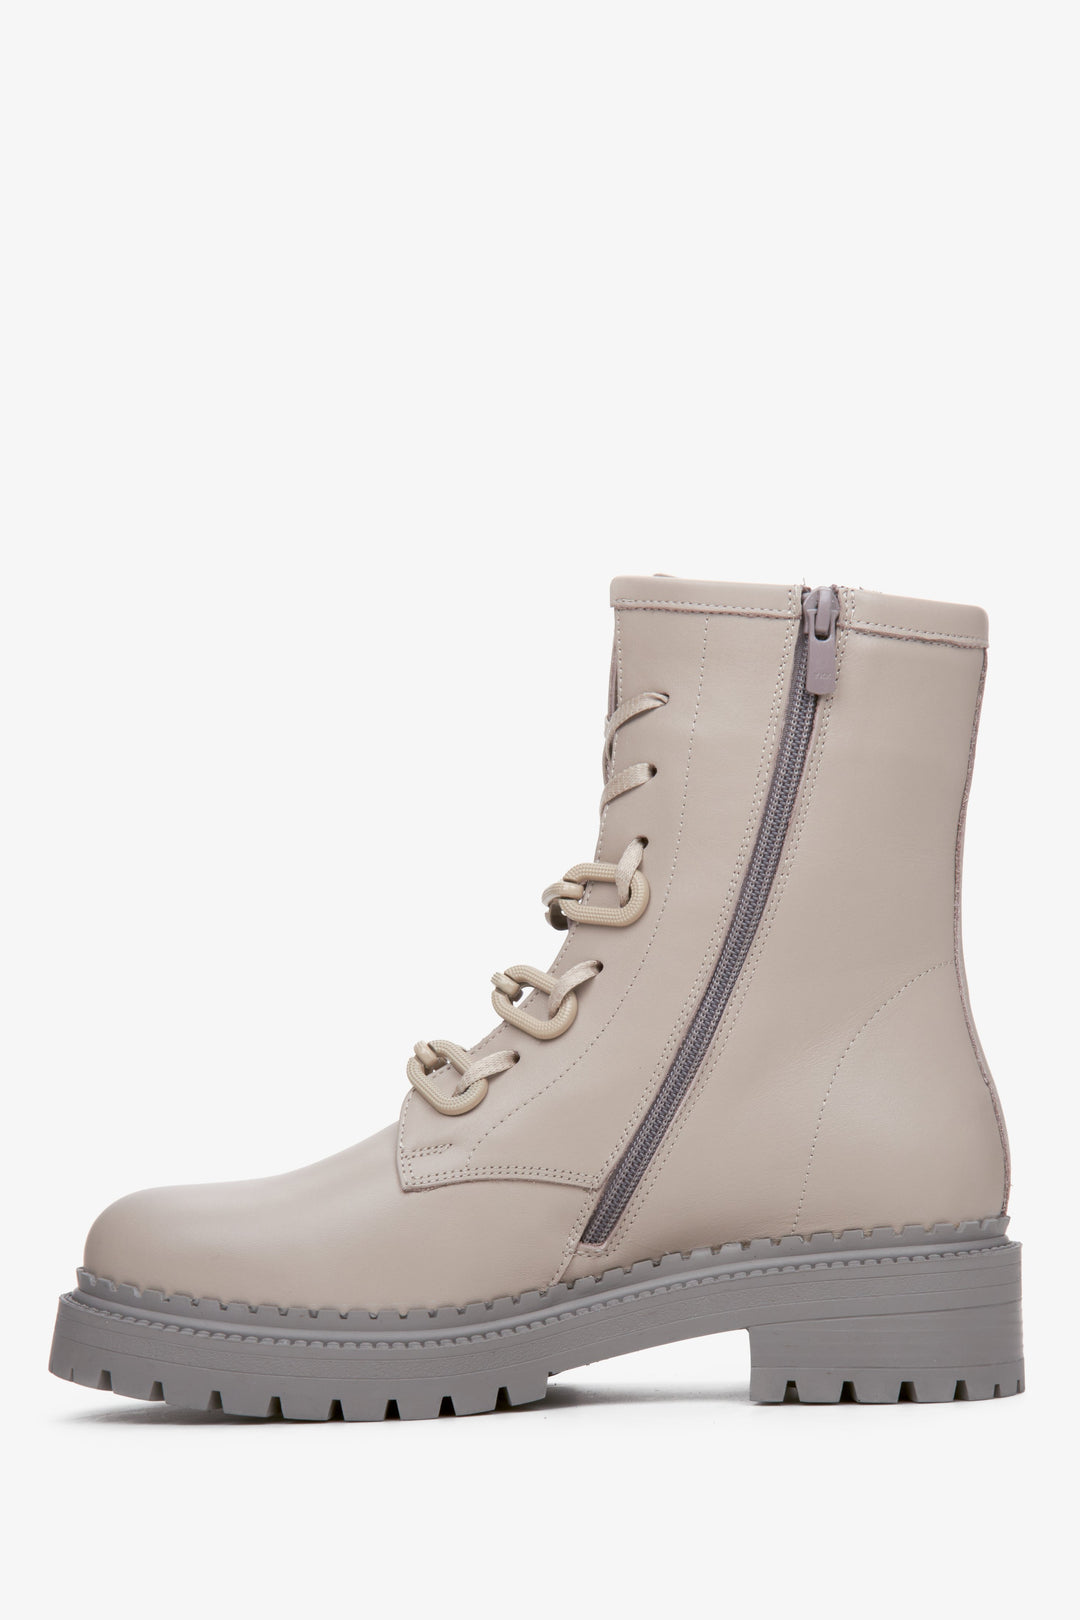 Women's grey ankle boots made of genuine leather Estro - shoe profile.